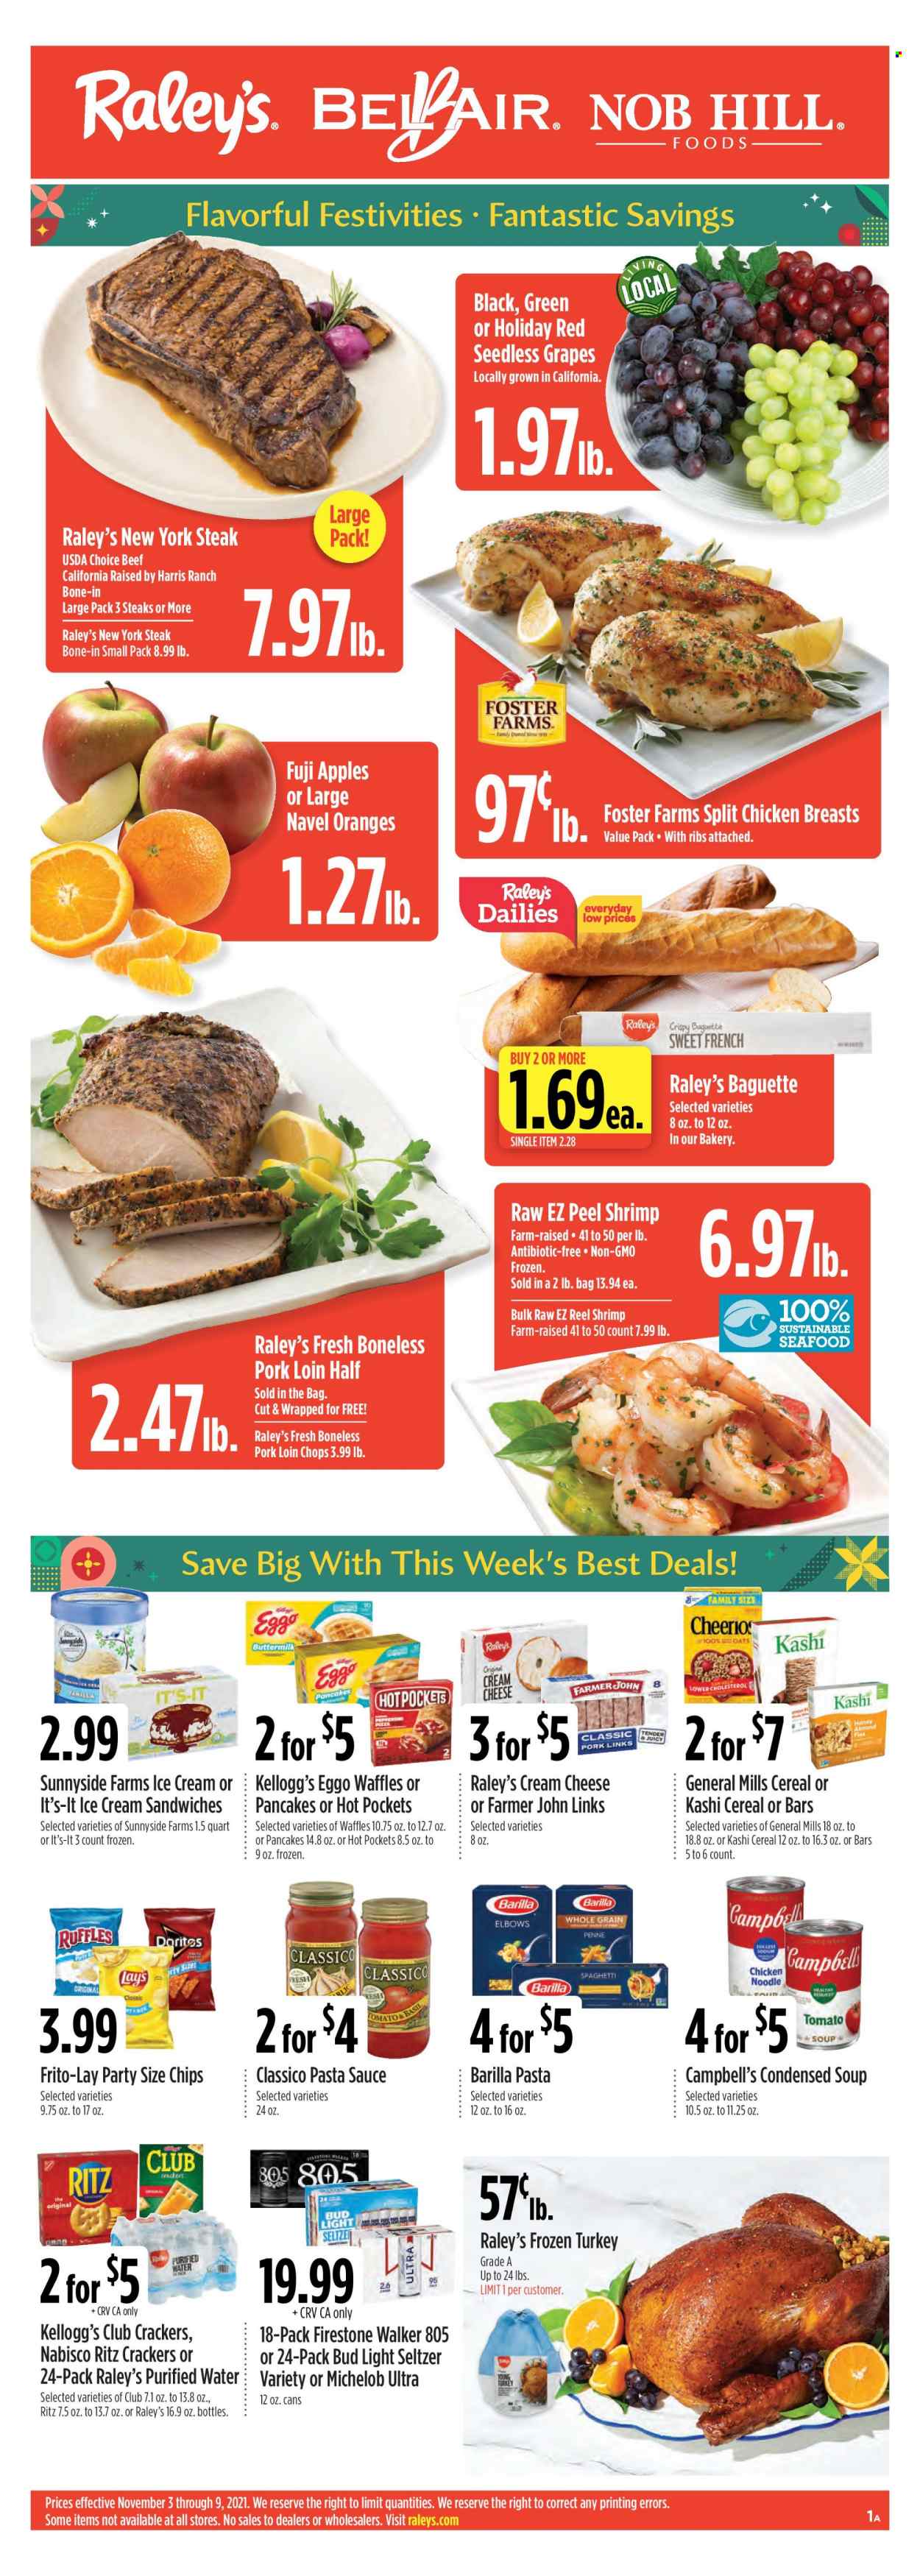 thumbnail - Raley's Flyer - 11/03/2021 - 11/09/2021 - Sales products - seedless grapes, baguette, waffles, apples, grapes, oranges, Fuji apple, seafood, shrimps, Campbell's, spaghetti, tomato soup, hot pocket, pizza, pasta sauce, condensed soup, soup, sauce, Barilla, noodles, instant soup, buttermilk, eggs, ice cream, ice cream sandwich, crackers, Kellogg's, RITZ, Doritos, Lay’s, Frito-Lay, Ruffles, oats, Harris, cereals, penne, Classico, purified water, Hard Seltzer, beer, Bud Light, Firestone Walker, whole turkey, chicken breasts, steak, pork chops, pork loin, pork meat, Michelob, navel oranges. Page 1.